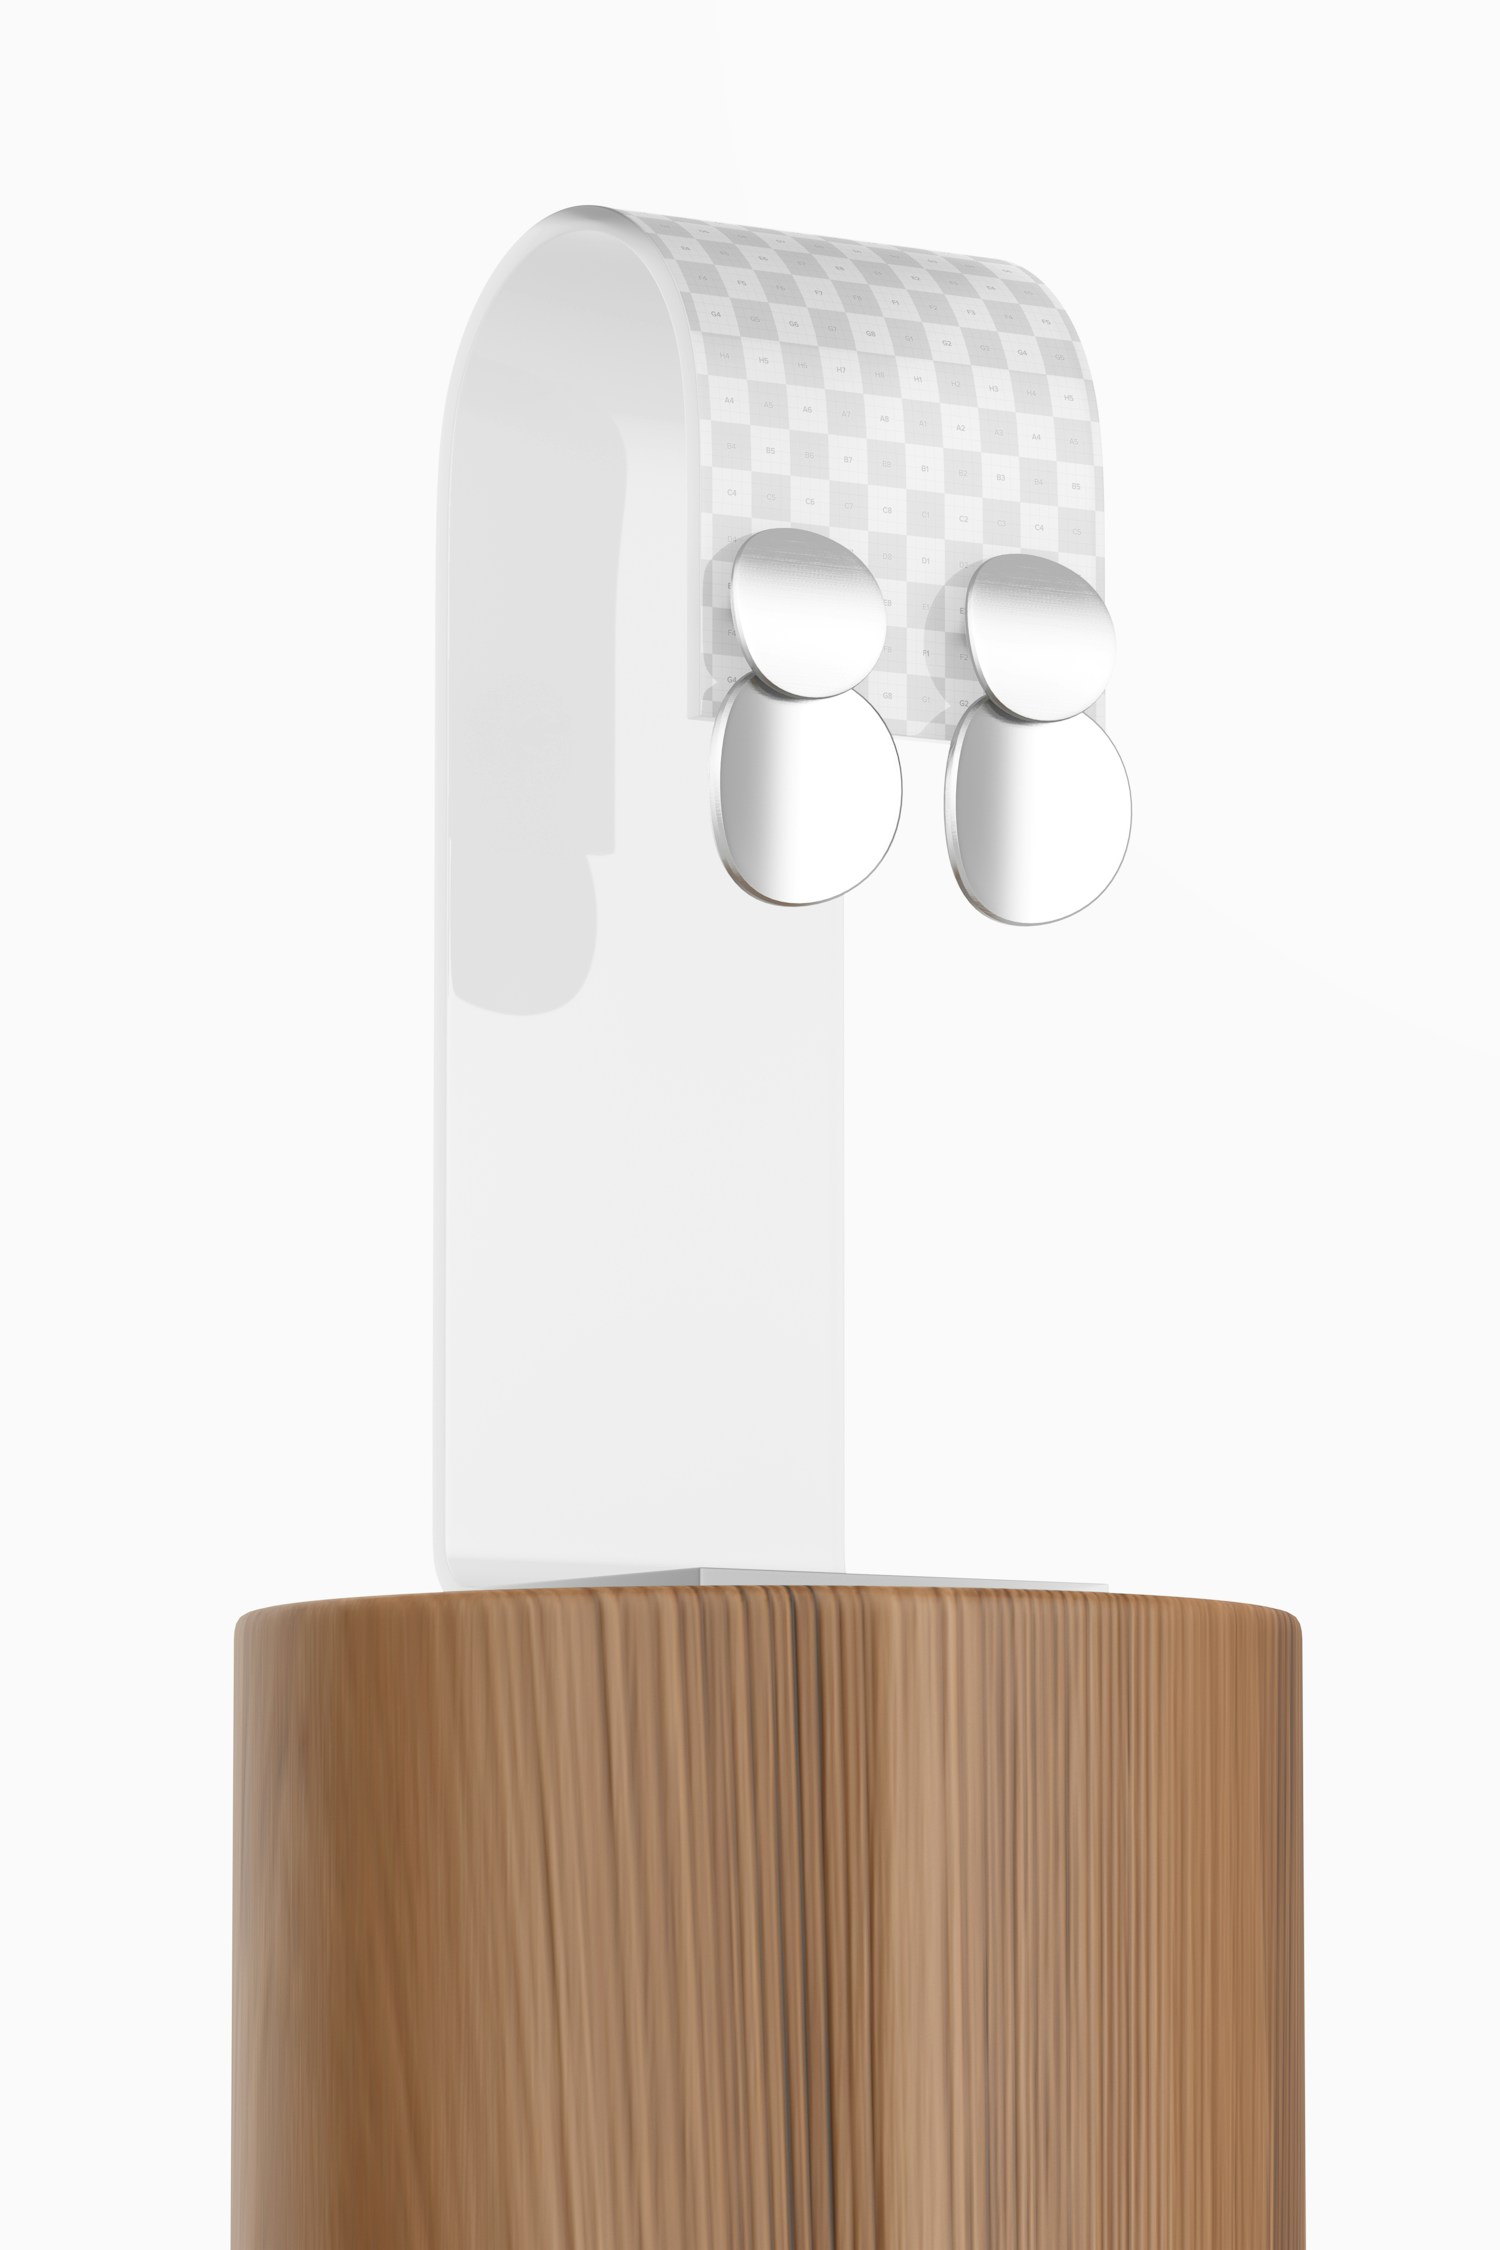 Curved Earring  Stand Mockup, Low Angle View